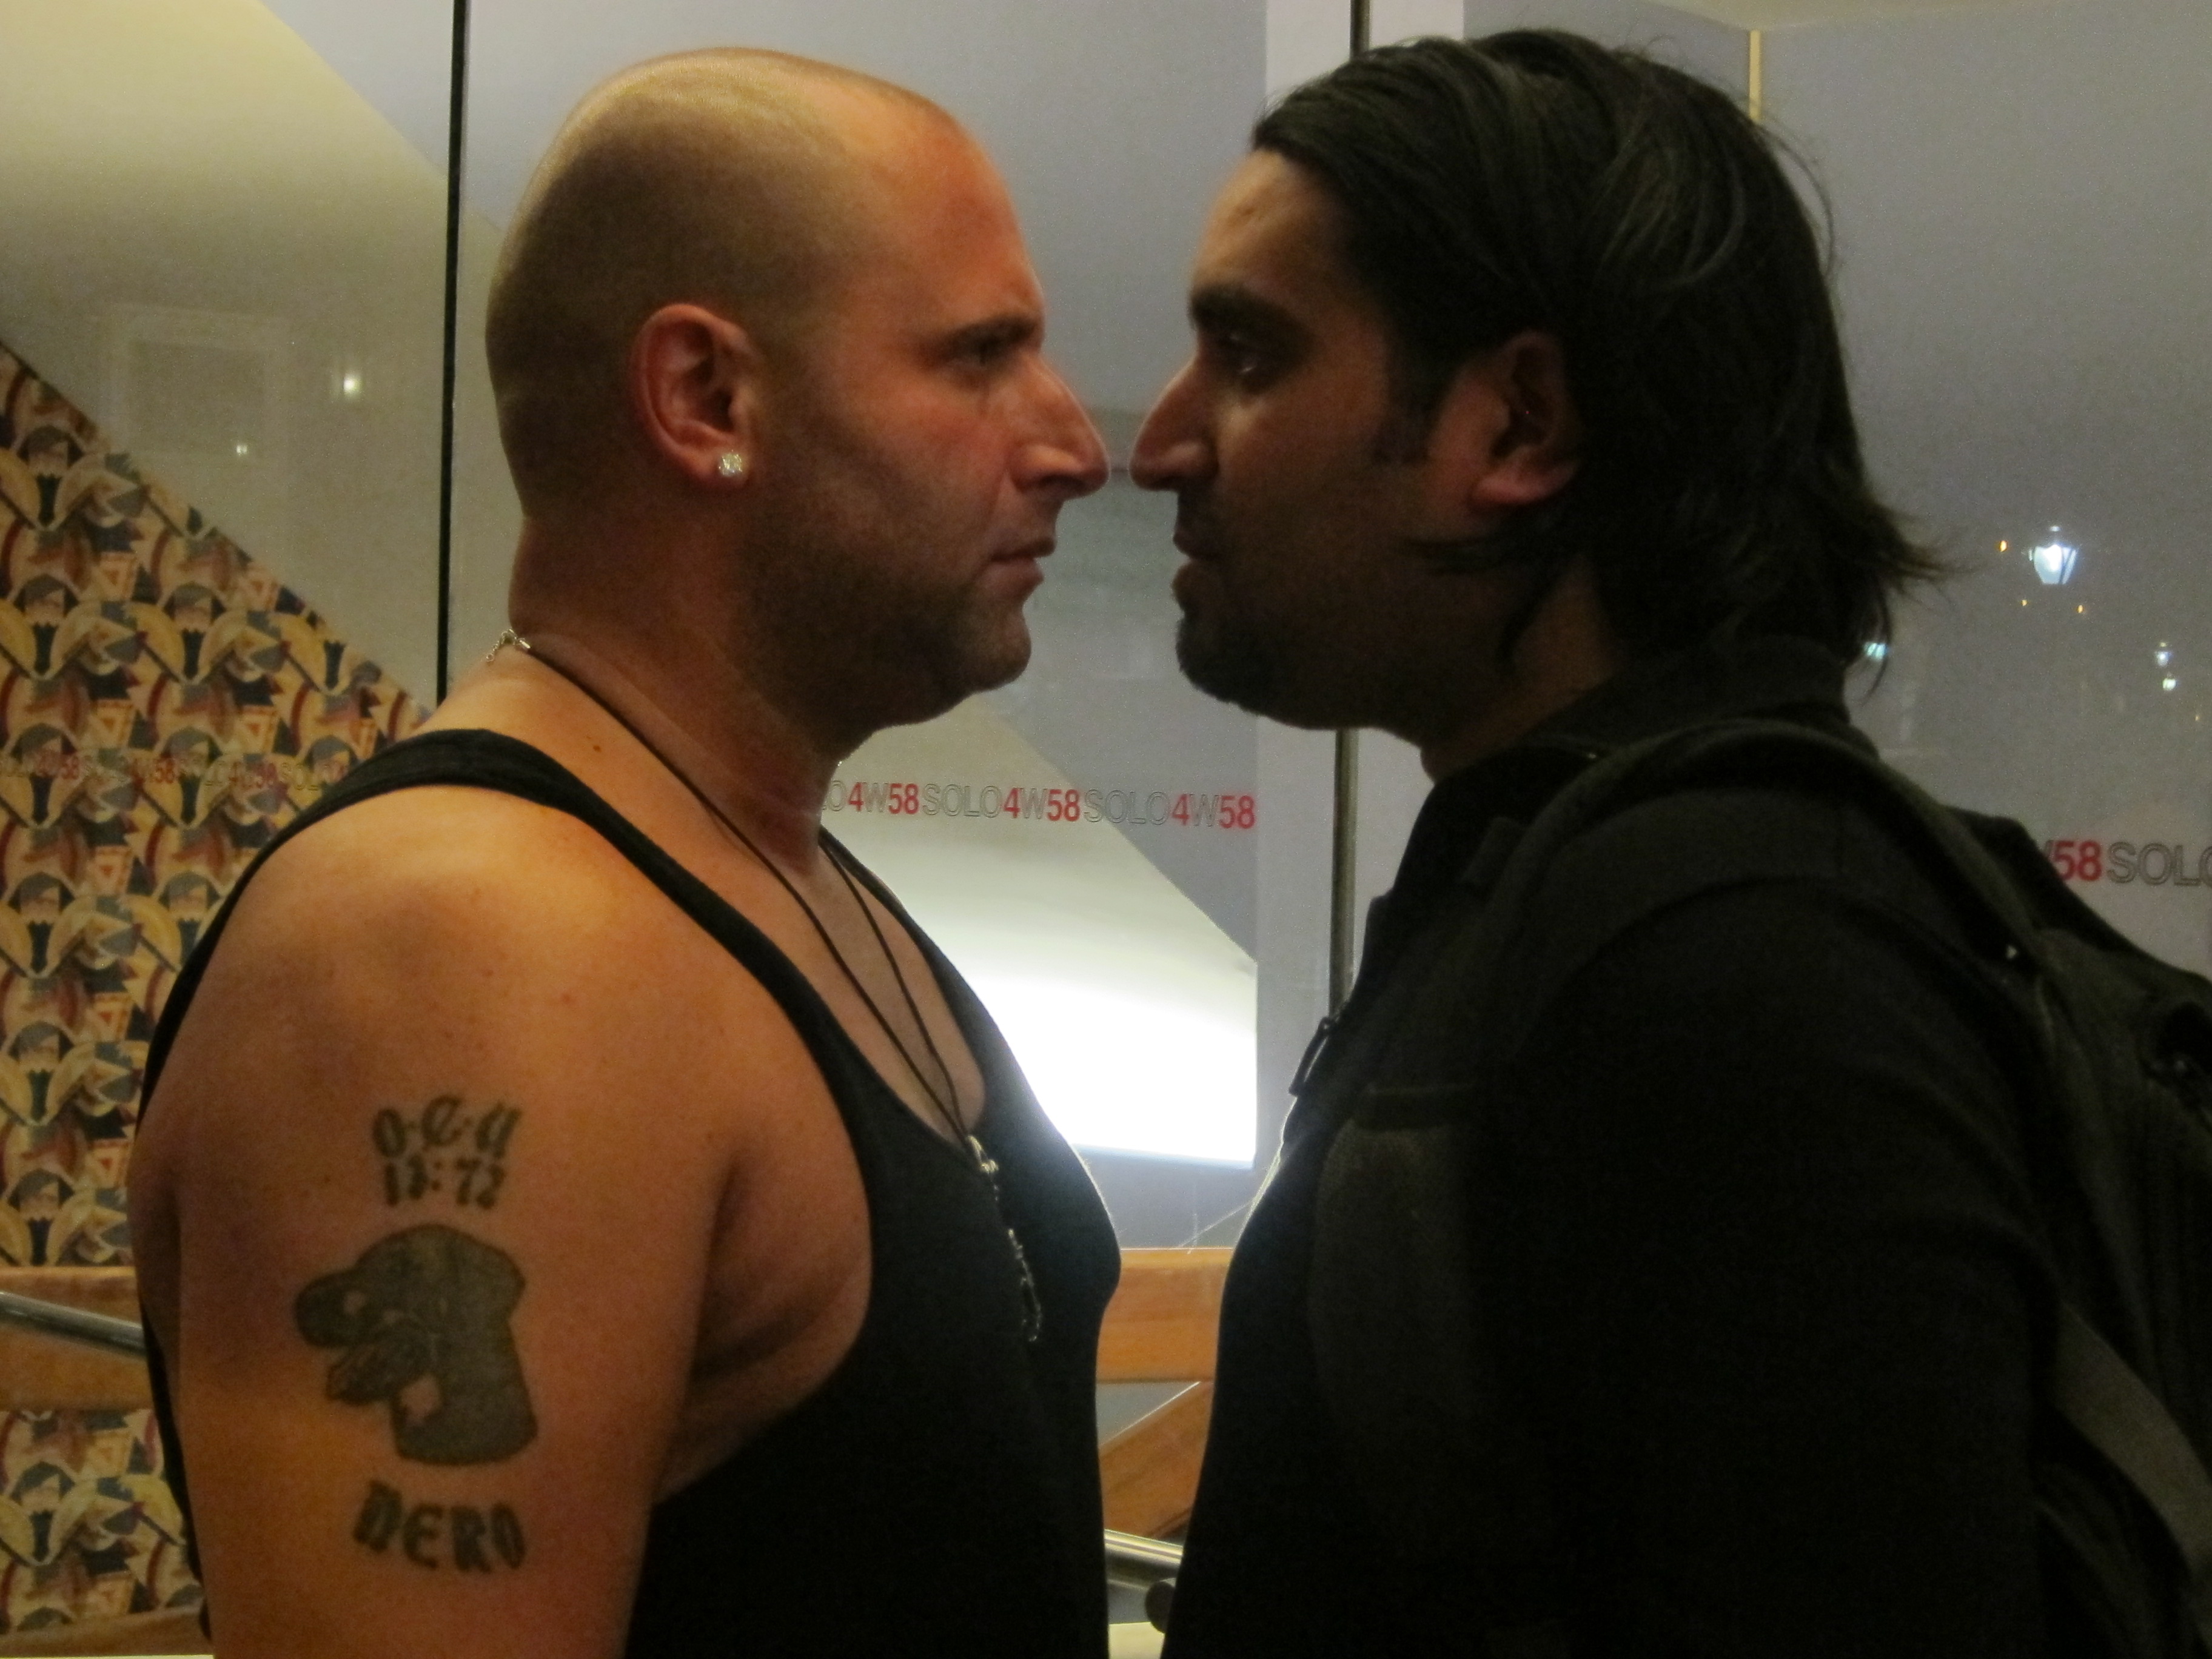 Ronnie 'the Rottweiler' Kerner (former street enforcer turned pro boxer) and Ronnie Banerjee on the set of Night Bird